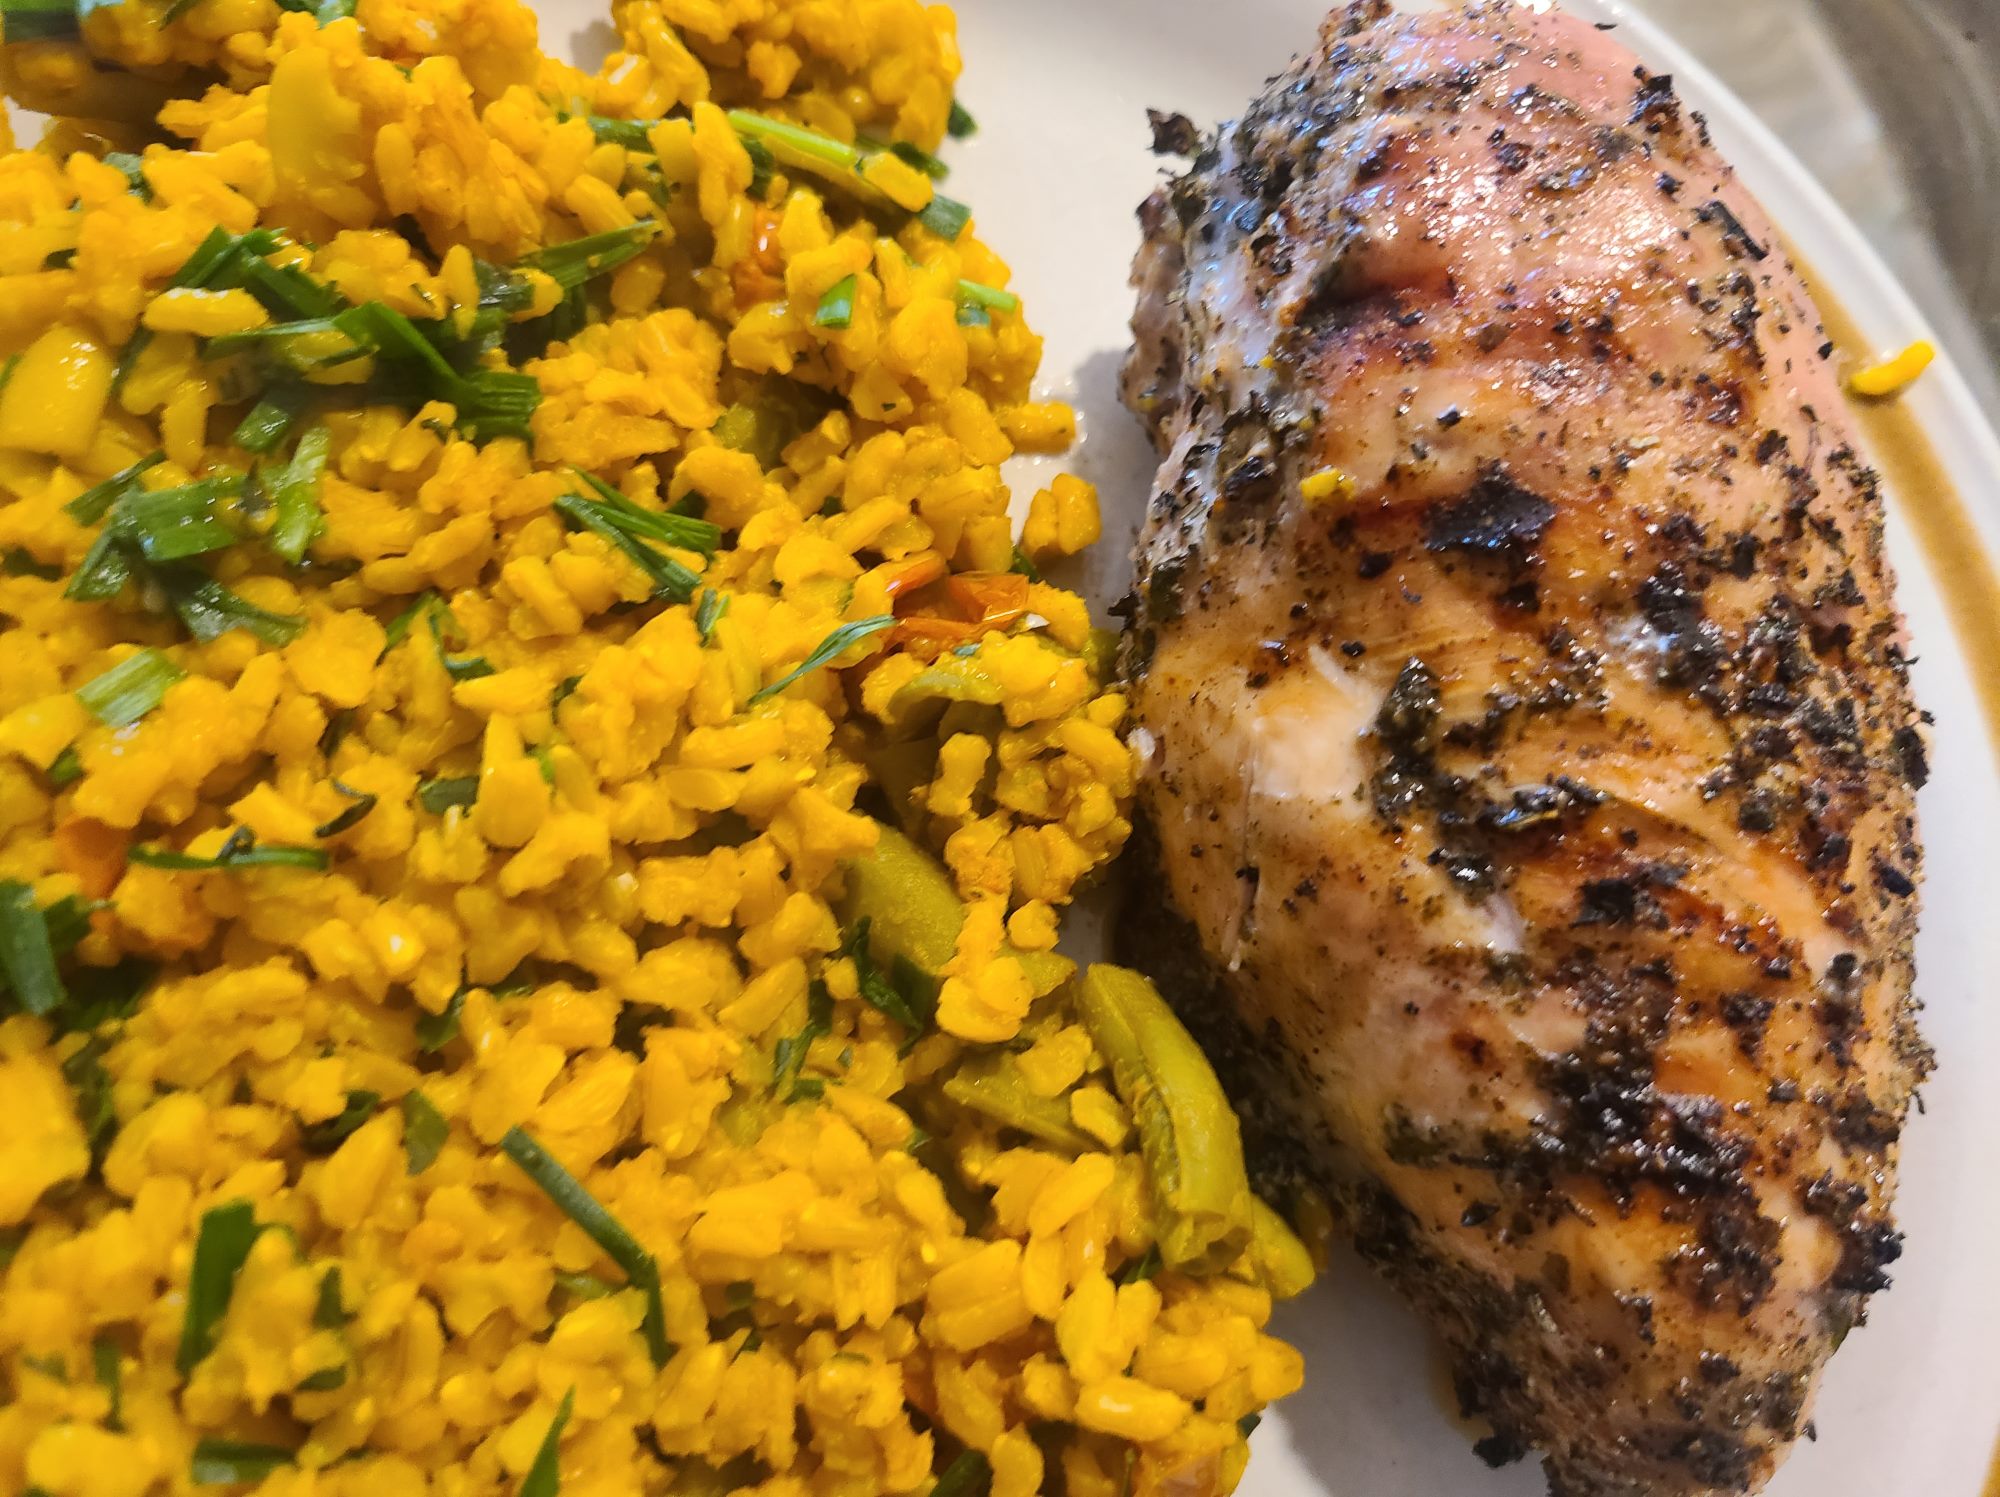 Barbecued chicken breast seasoned with garden herbs - Photo by popular fitness